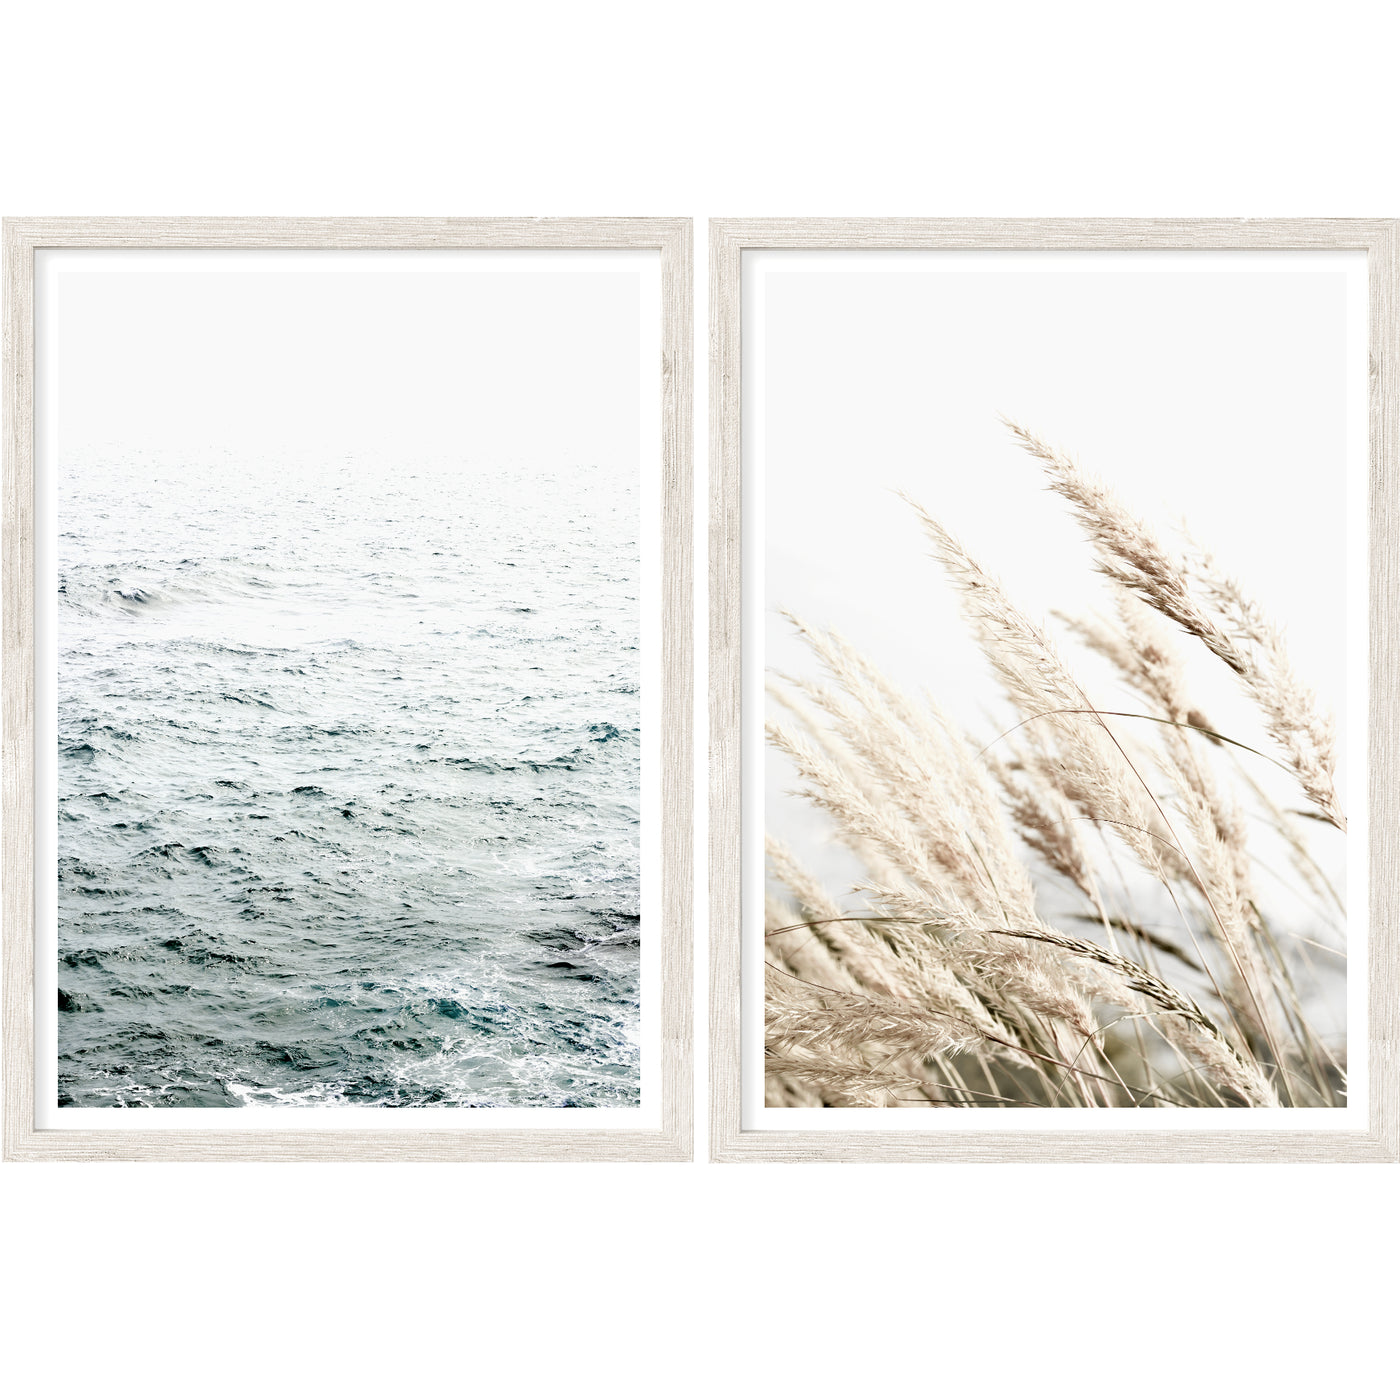 Distant Waters No. 4 - Set of 2